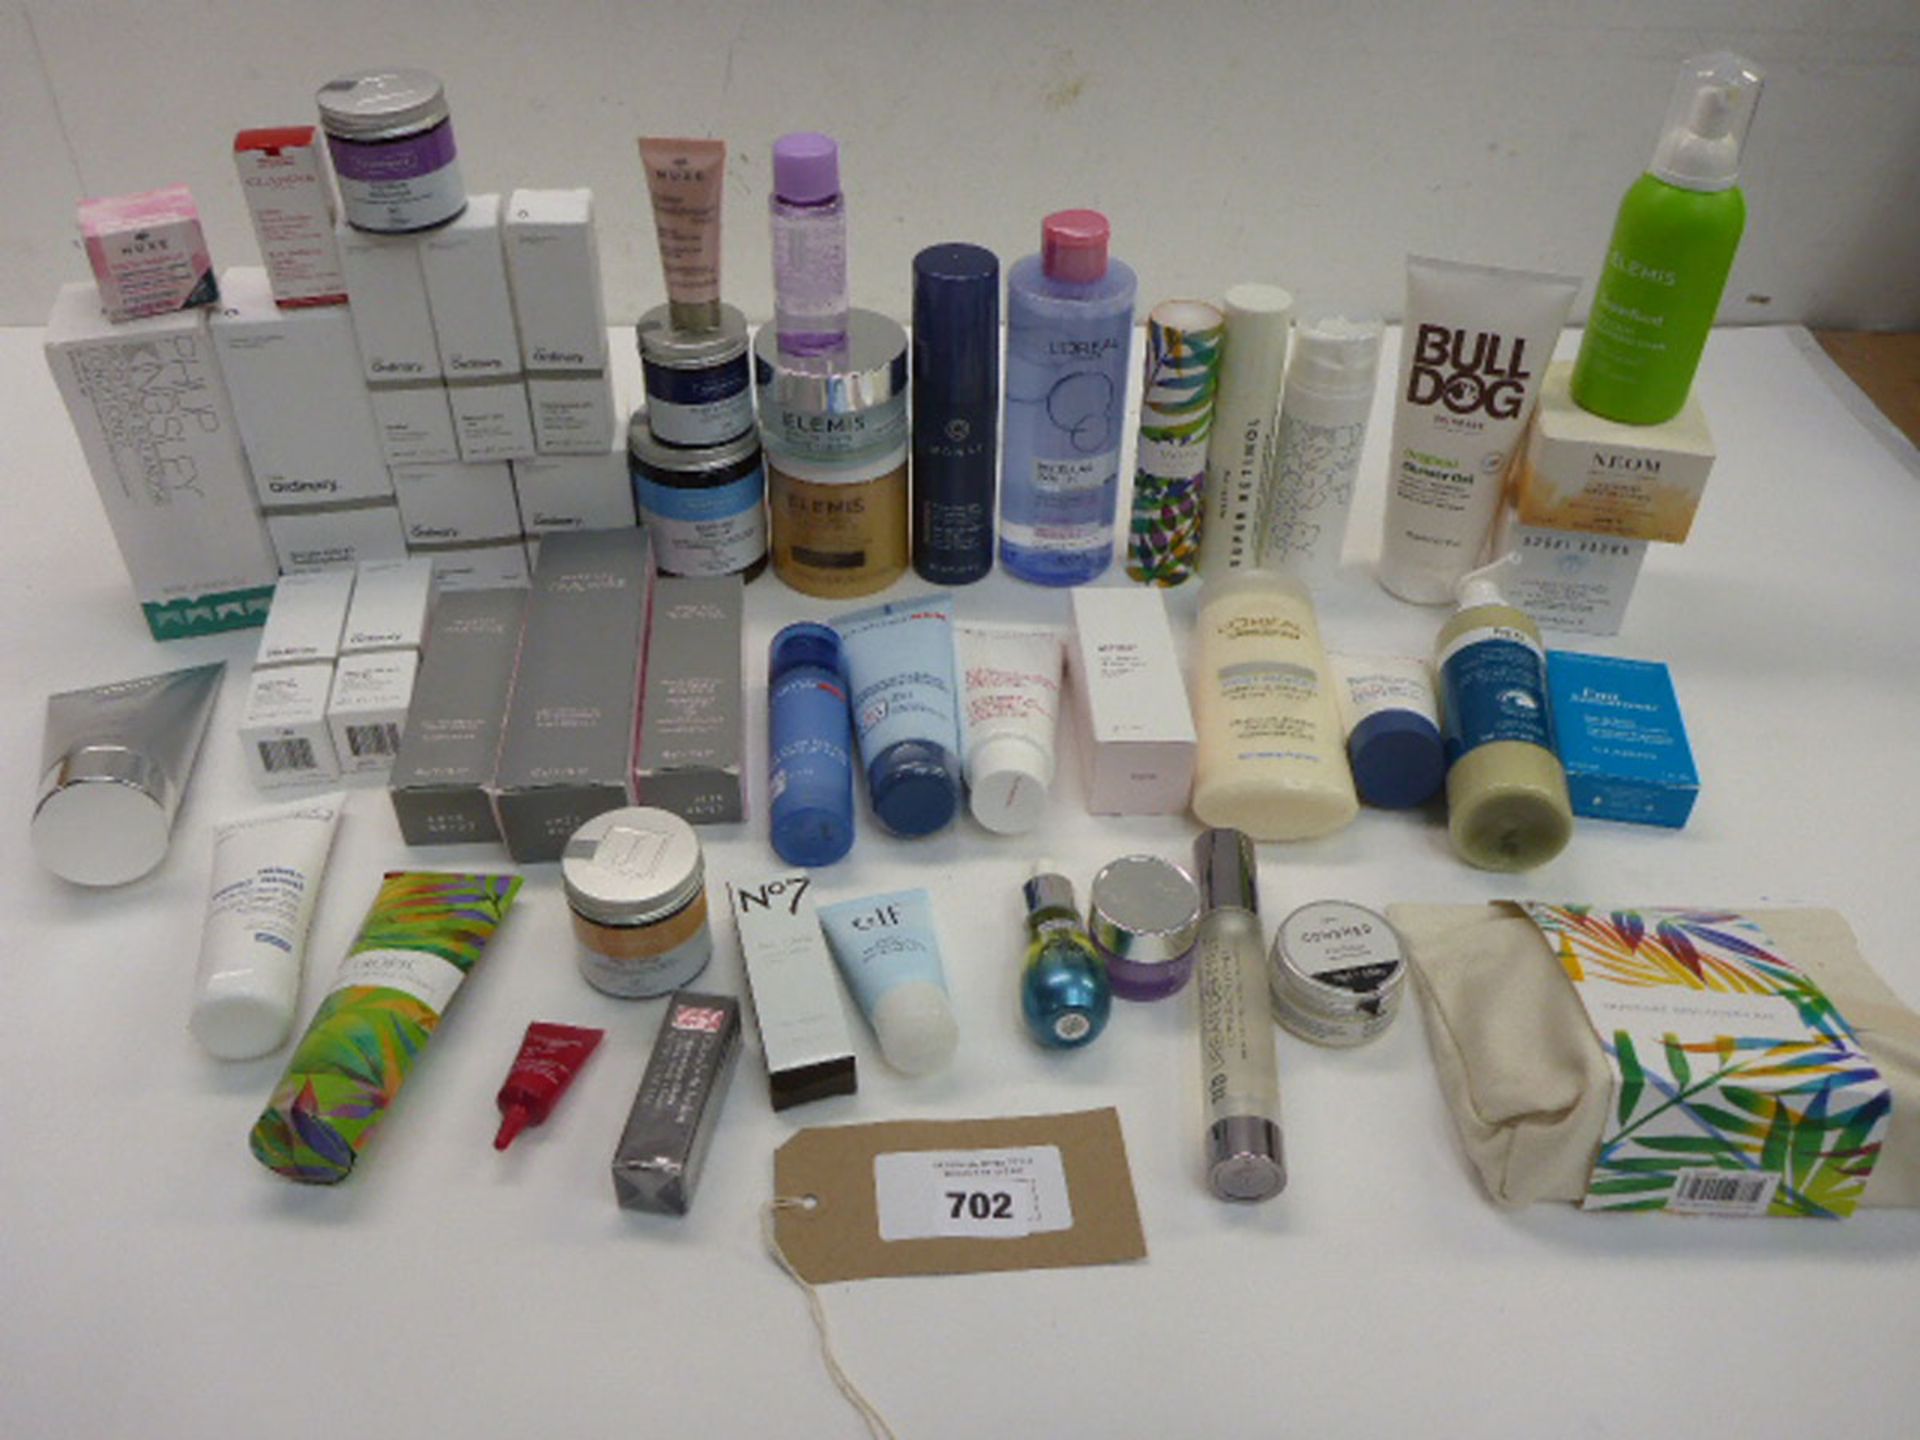 Large selection of branded beauty products including Neom, Elemis, The Ordinary, L'Oreal, Tropic and